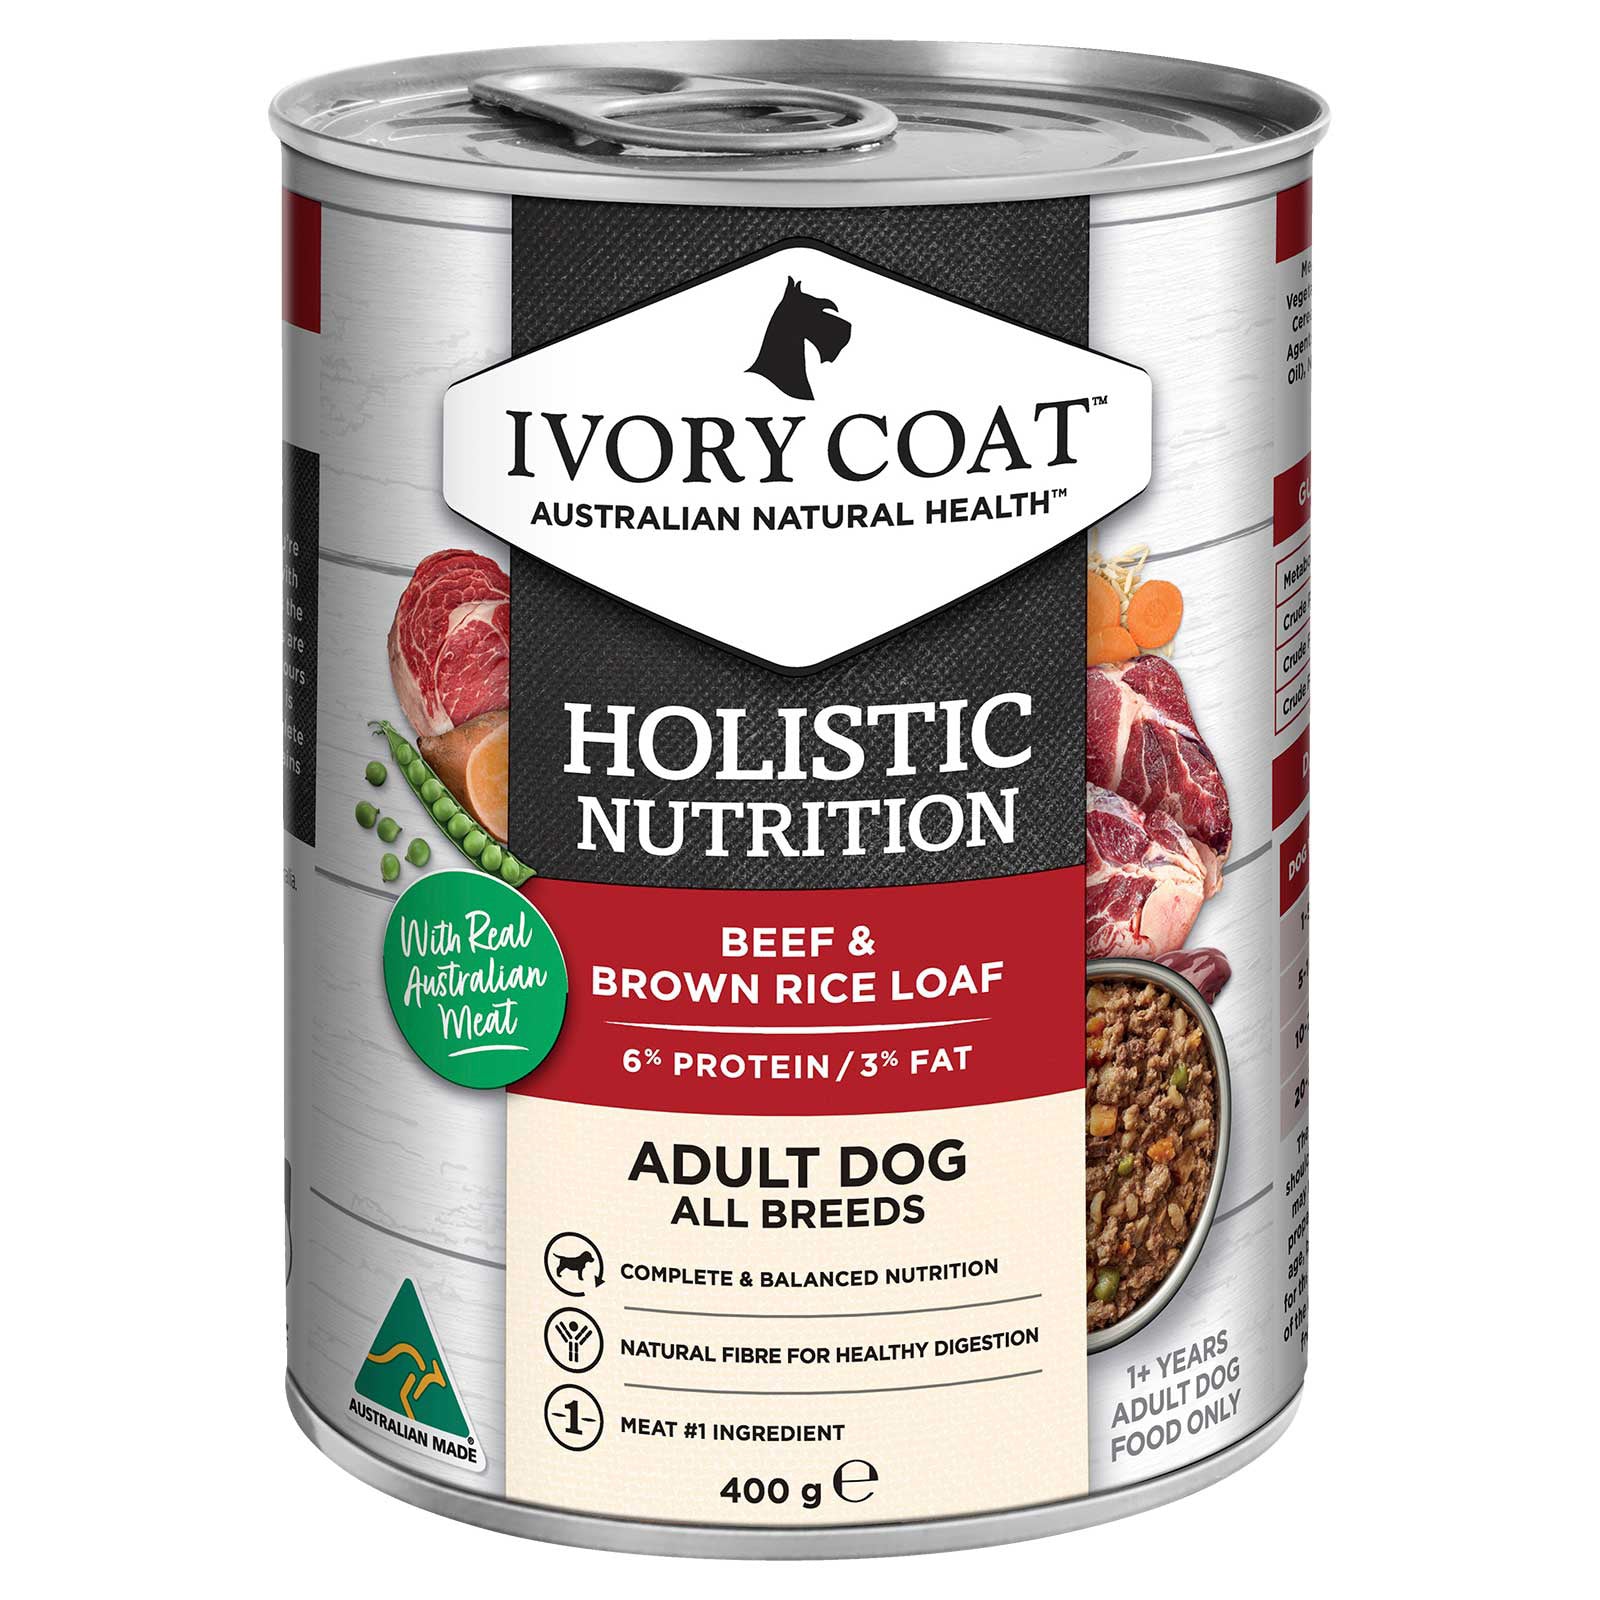 Ivory Coat Dog Food Can Adult Beef & Brown Rice Loaf